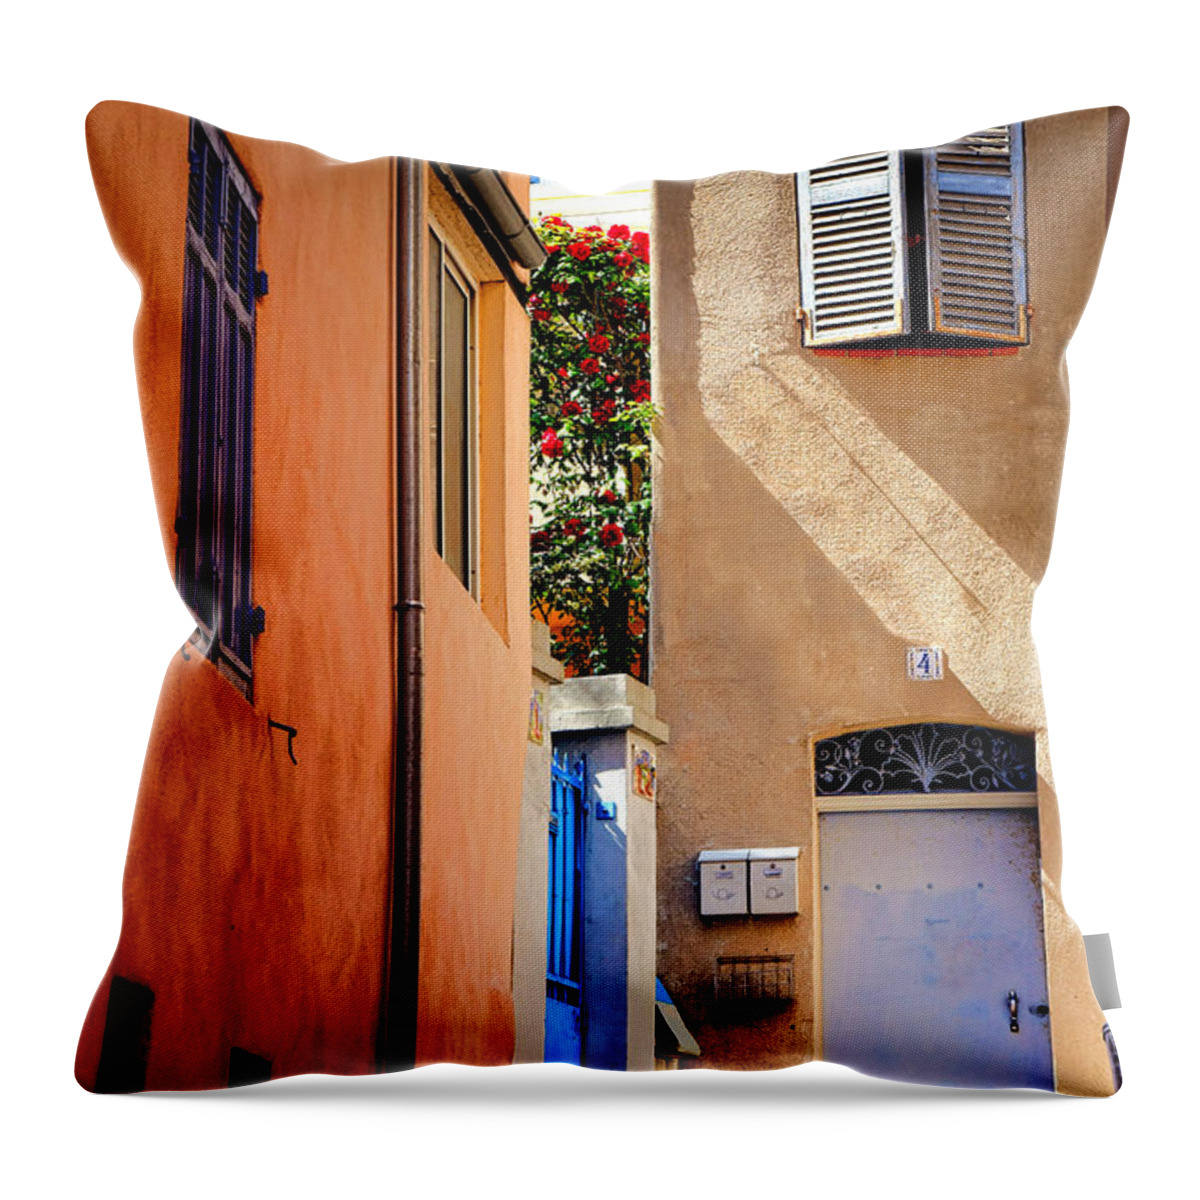 Provence Throw Pillow featuring the photograph Provencal Passage by Olivier Le Queinec